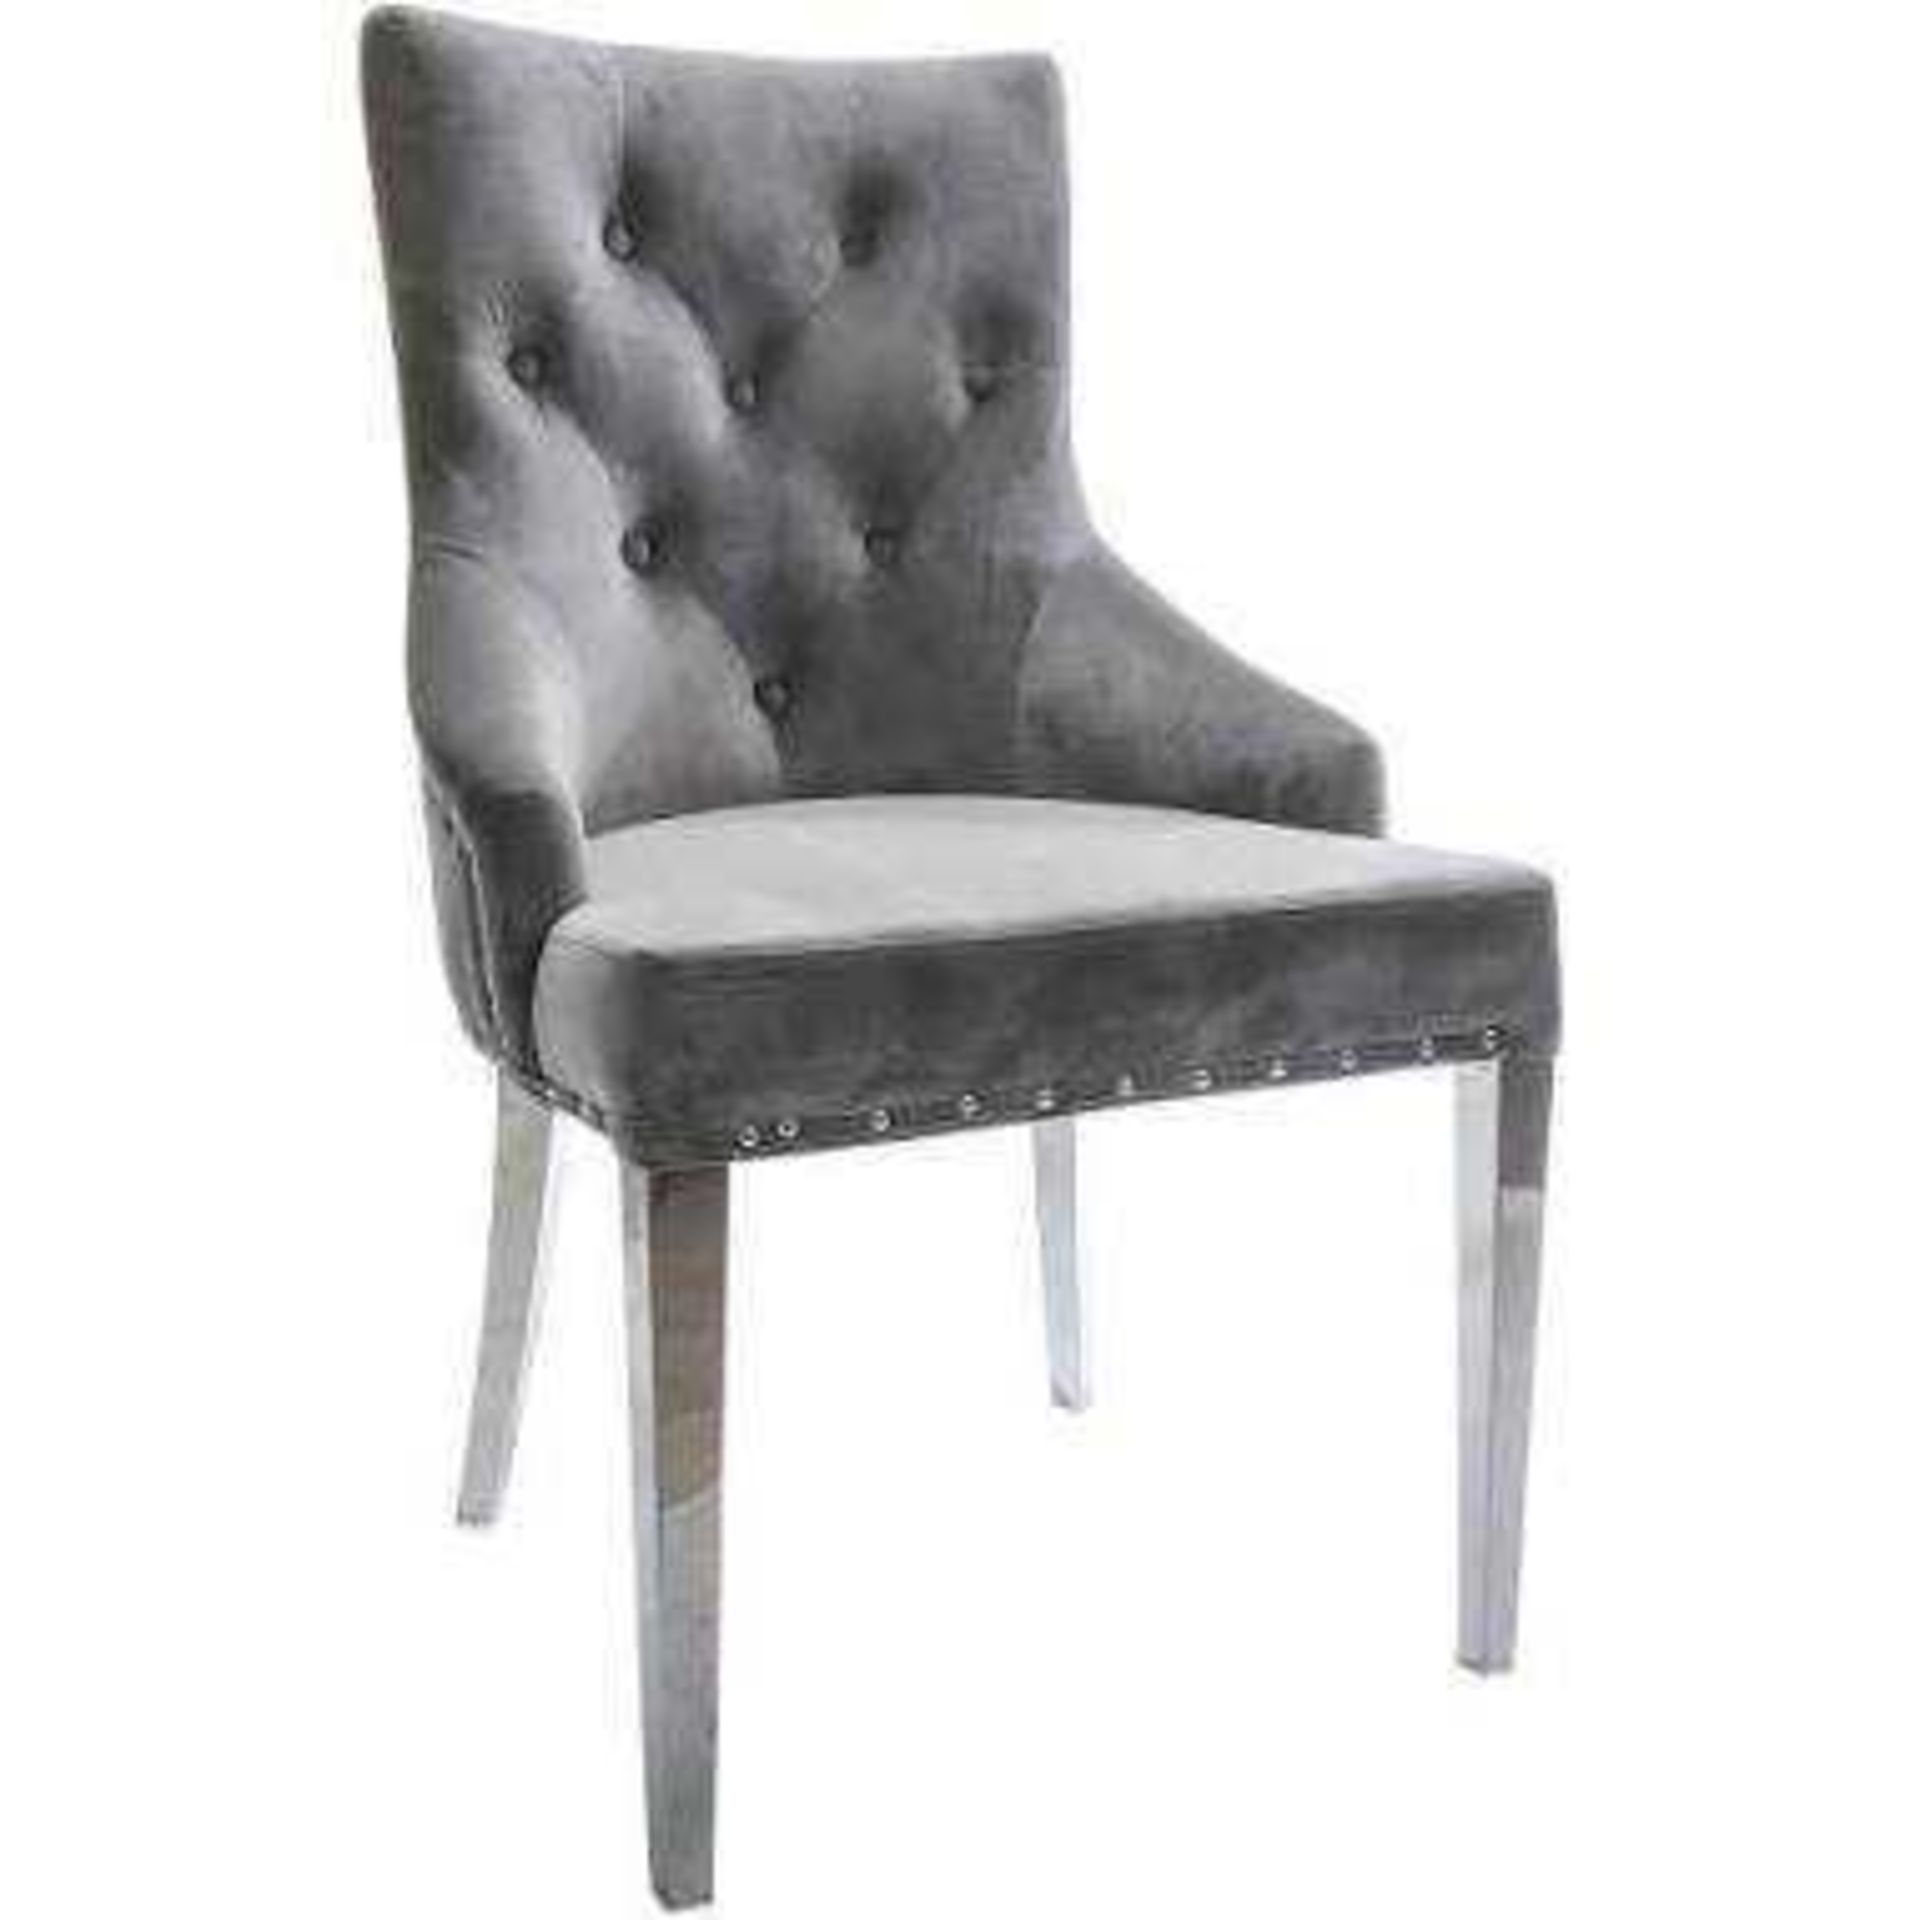 RRP £500 Brand New Arighi Bianchi Knocker Back Light Grey Dining Chairs